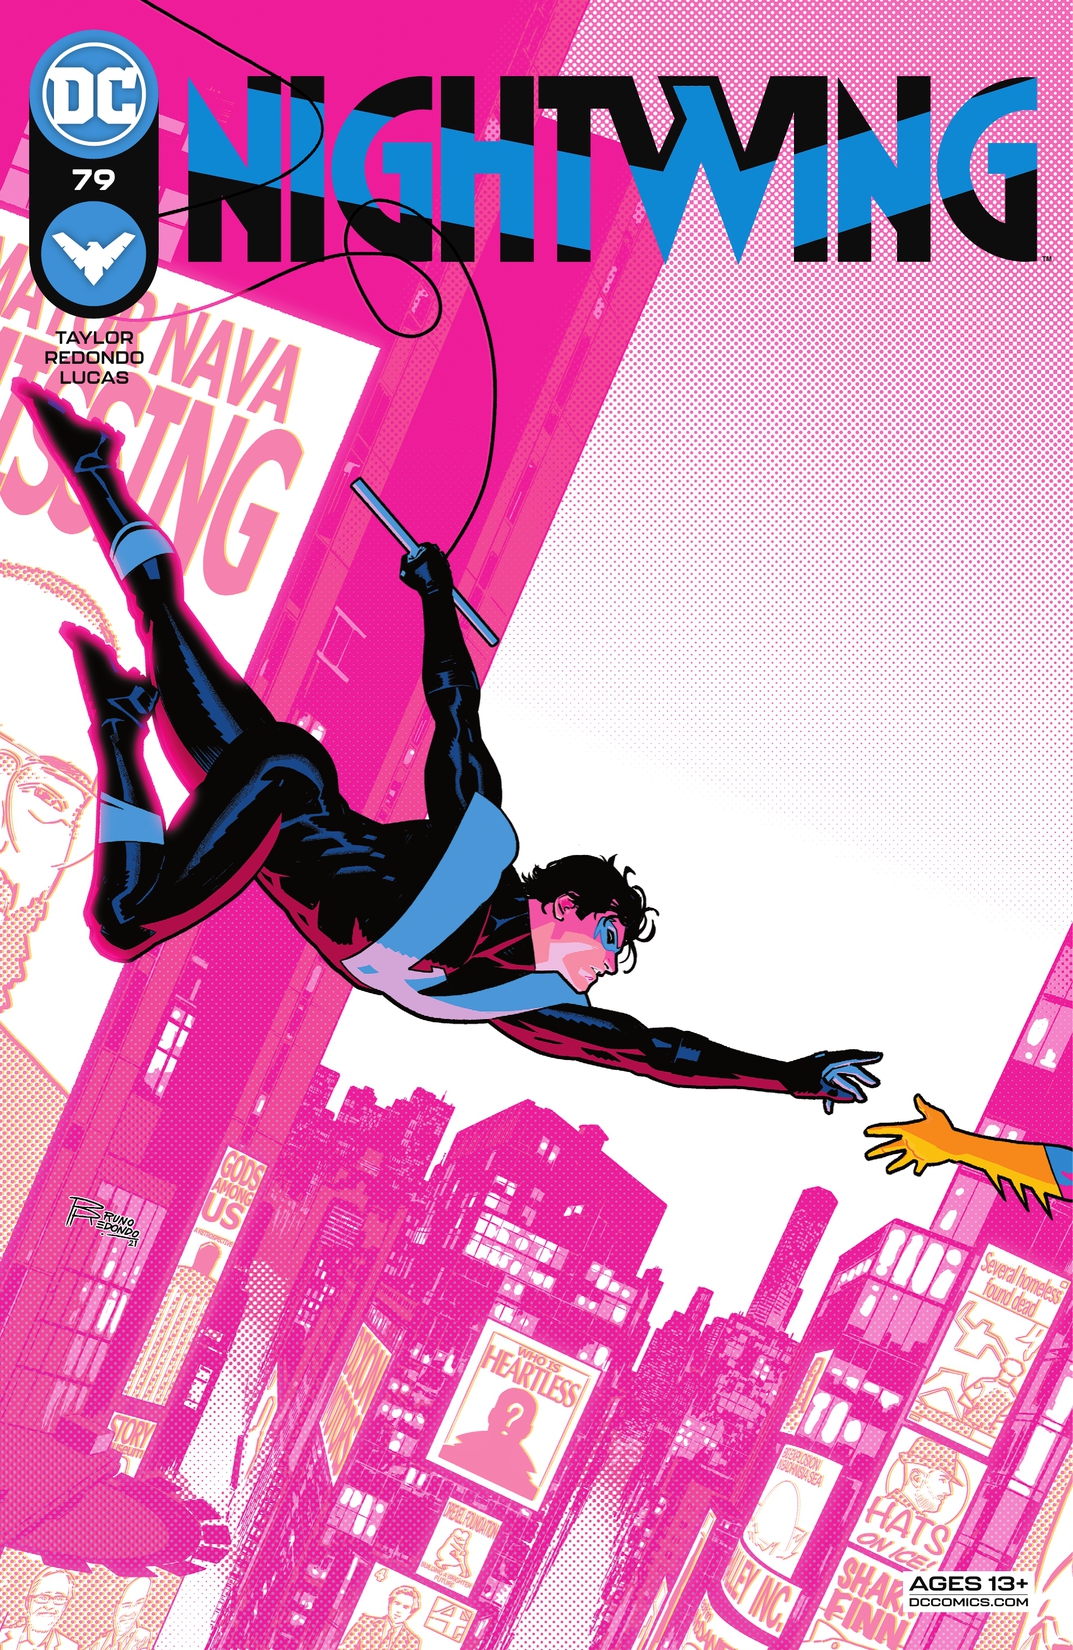 Nightwing (2016-) #79 preview images